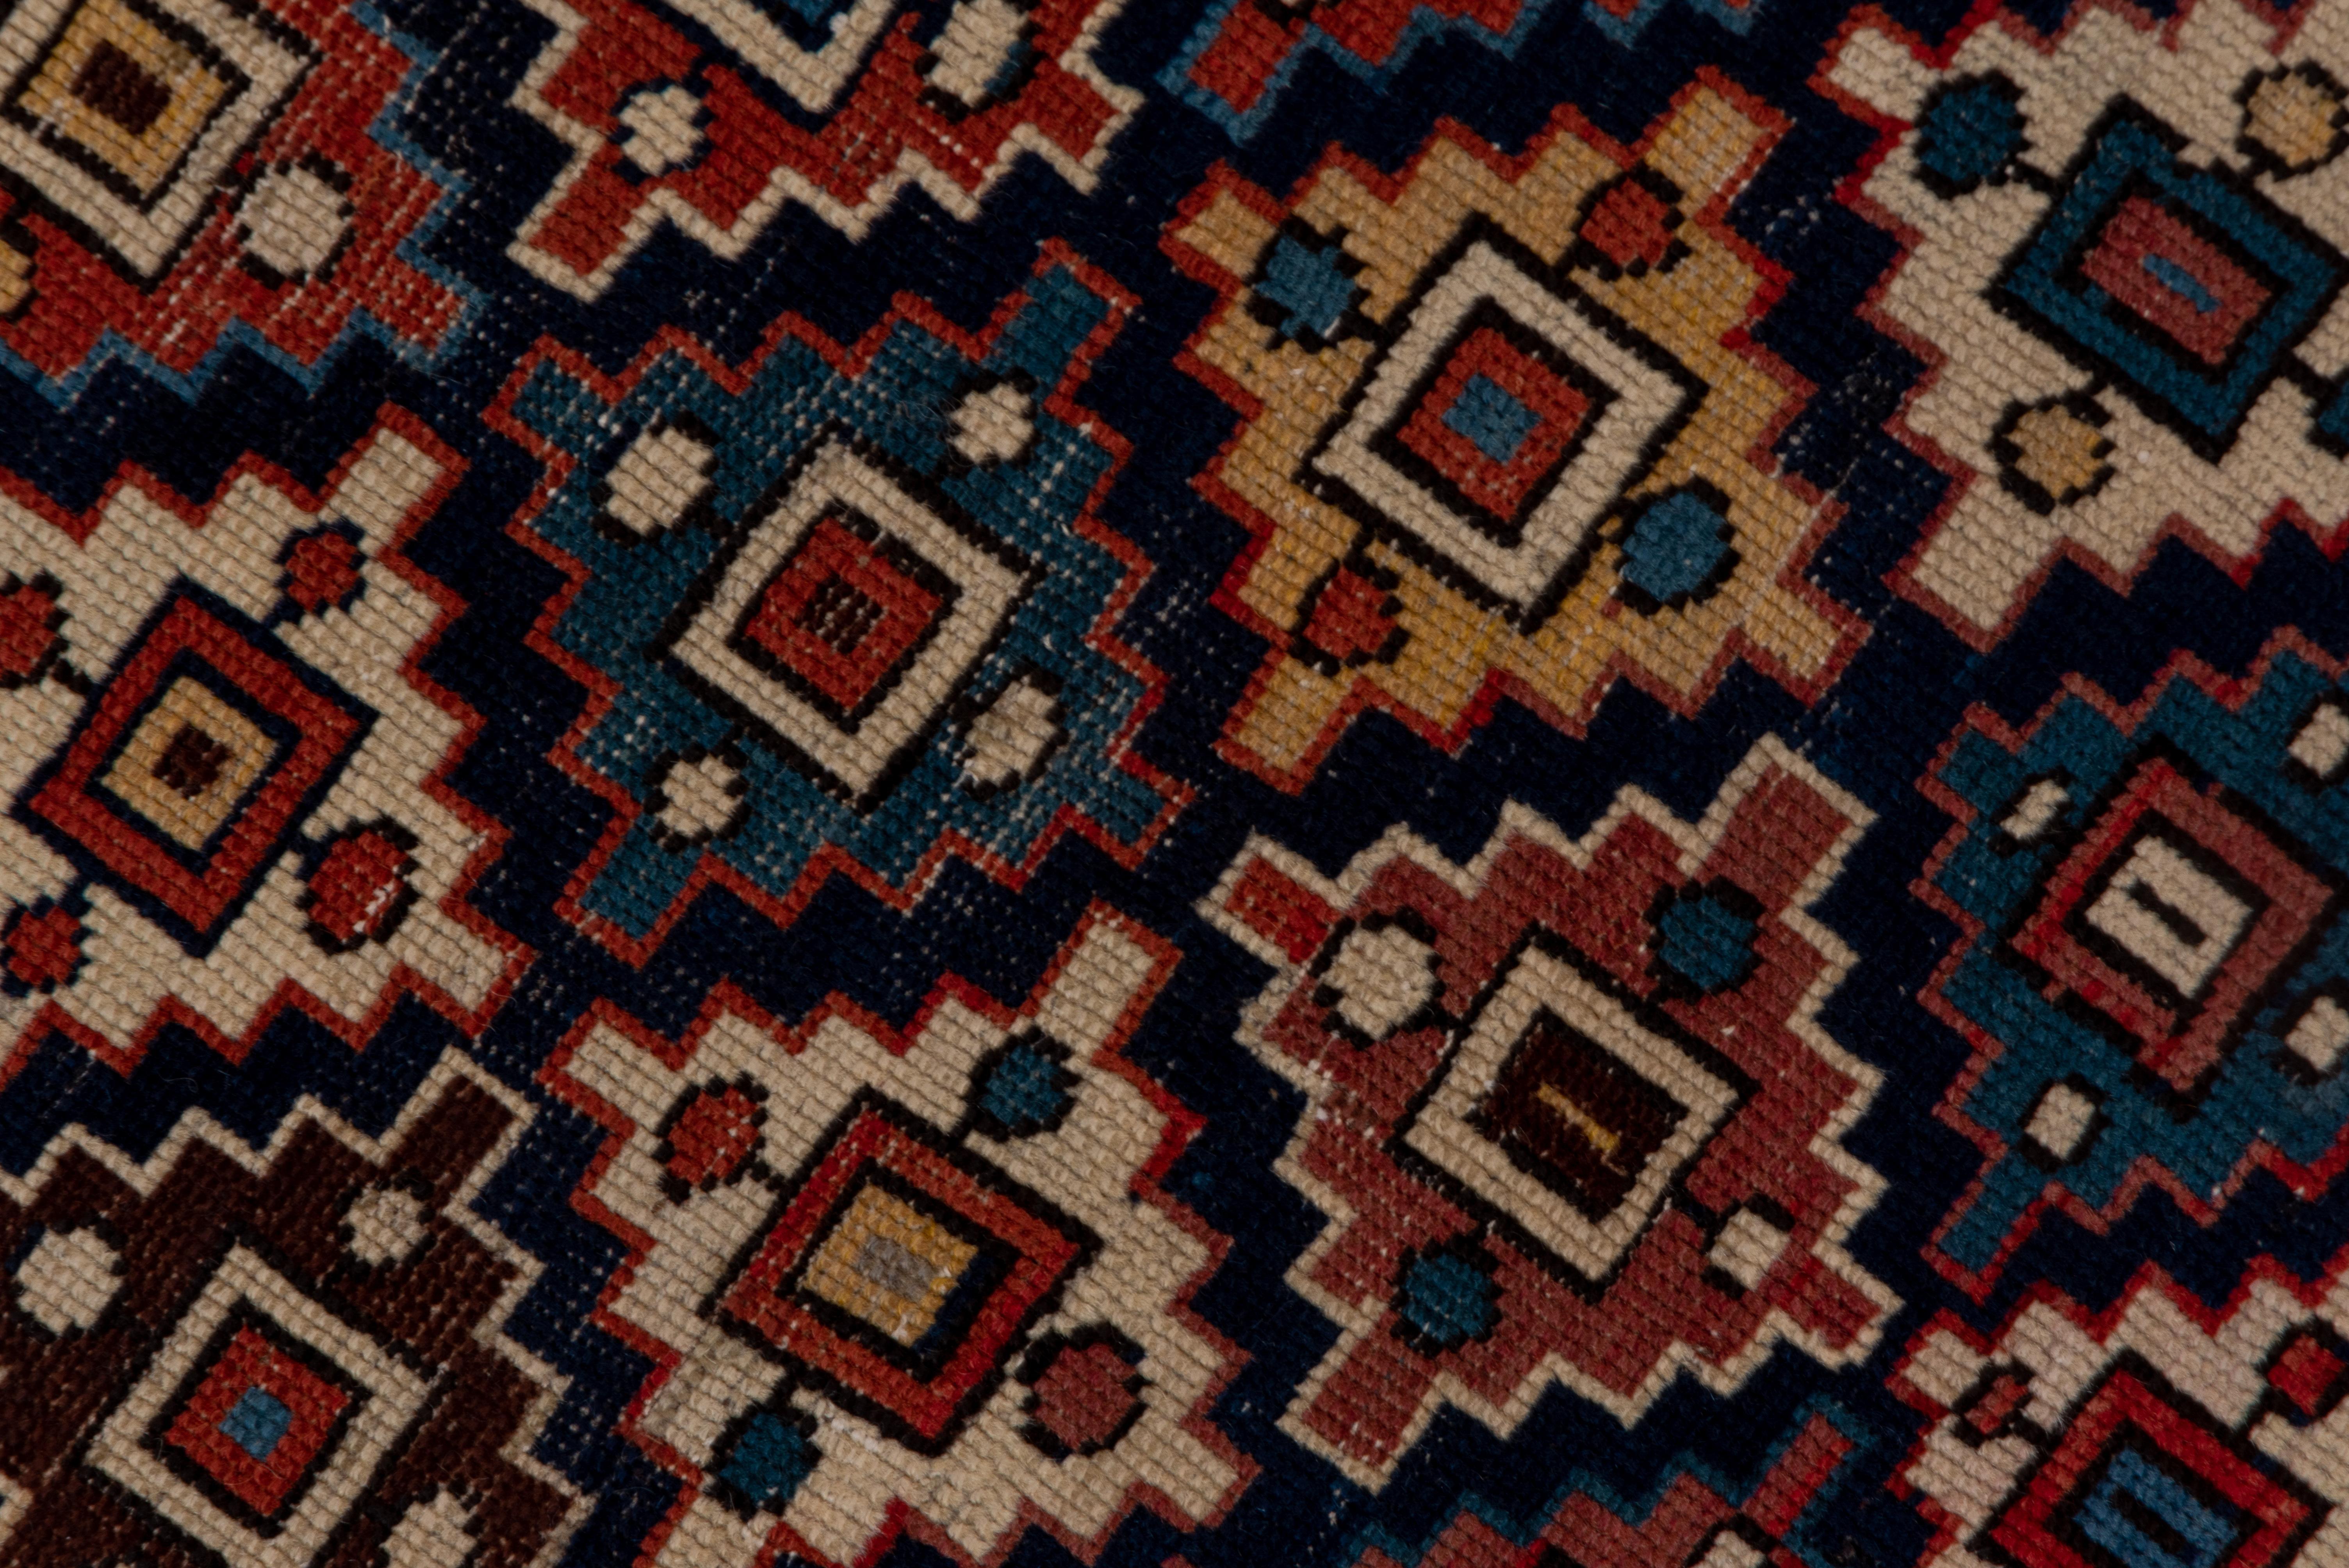 Early 20th Century Antique Caucasian Shirvan Rug, Geometric Field, Red, Navy & Yellow Palette